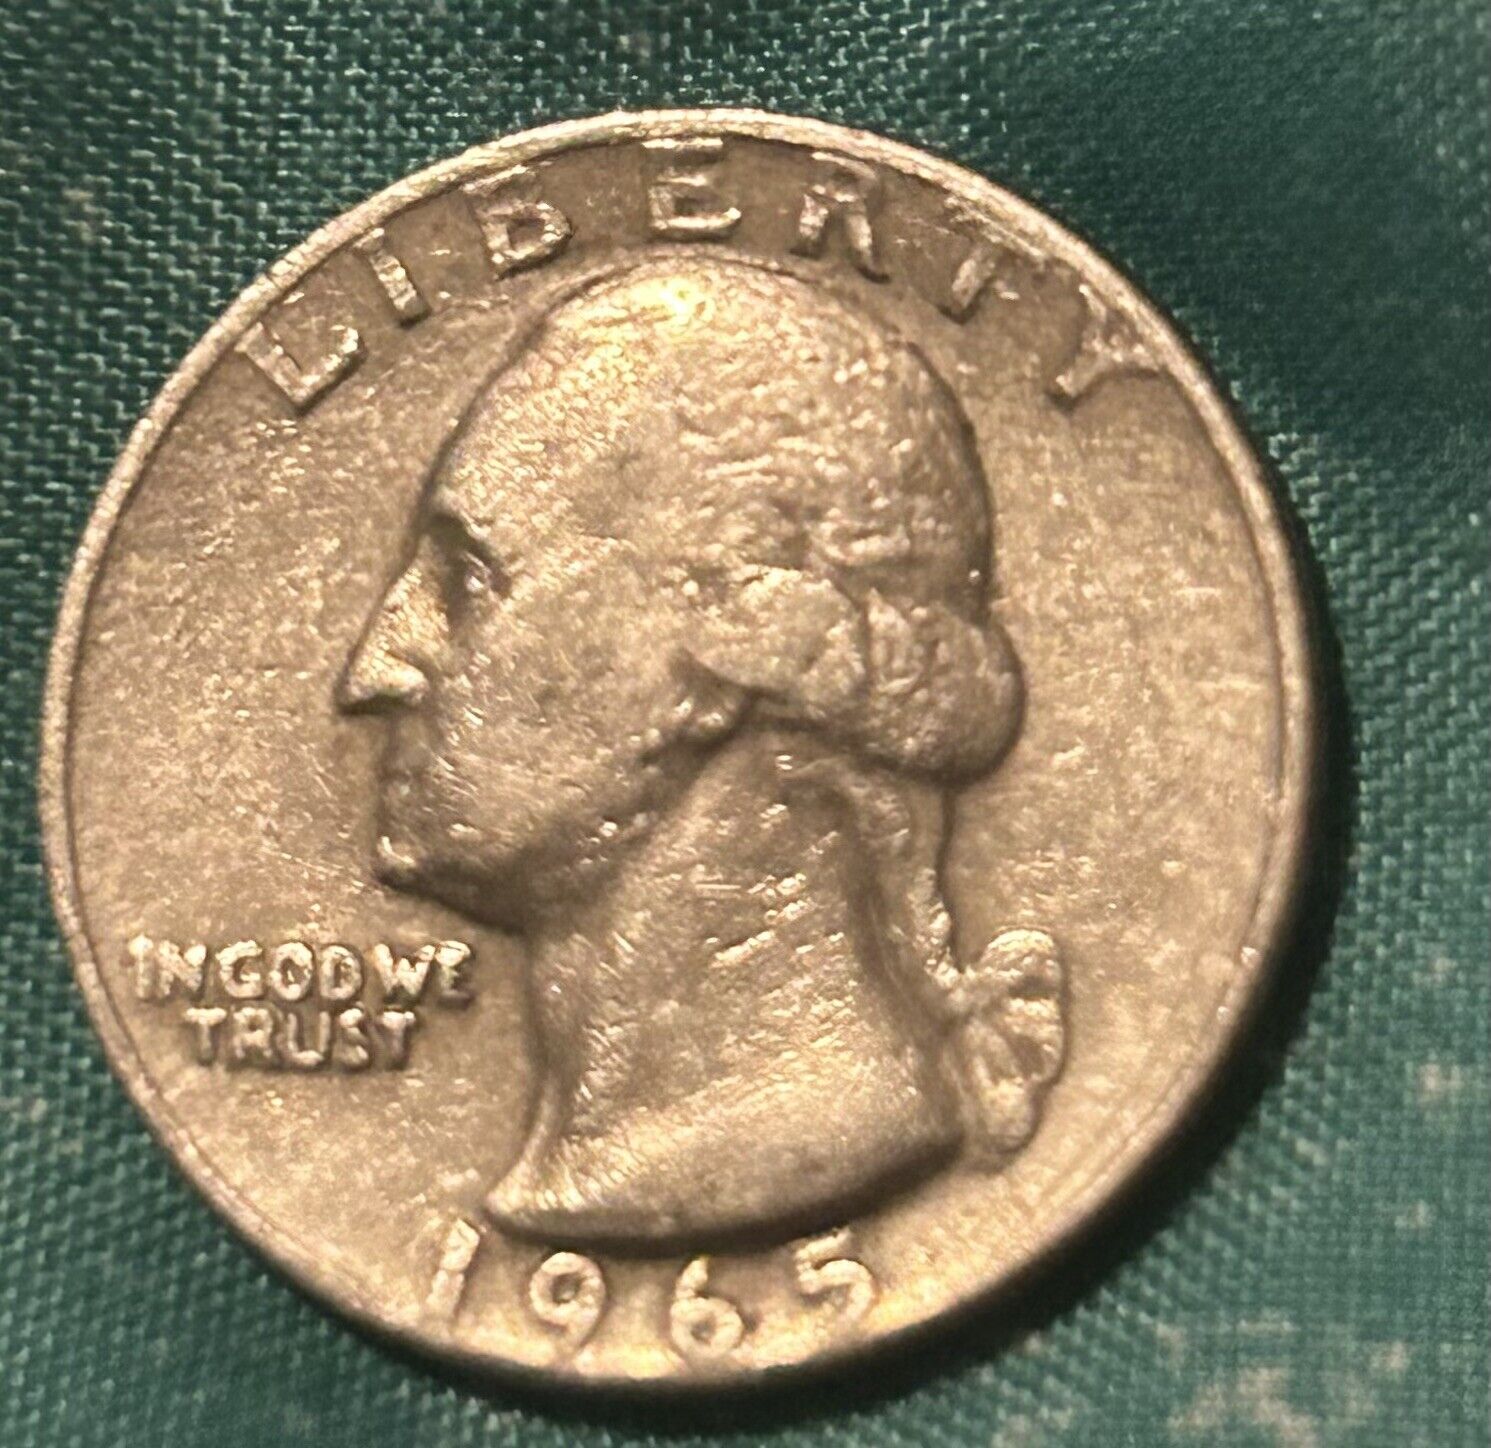 Vintage Rare 1965 Quarter No Mint Mark and Partial Collar And Letter Error